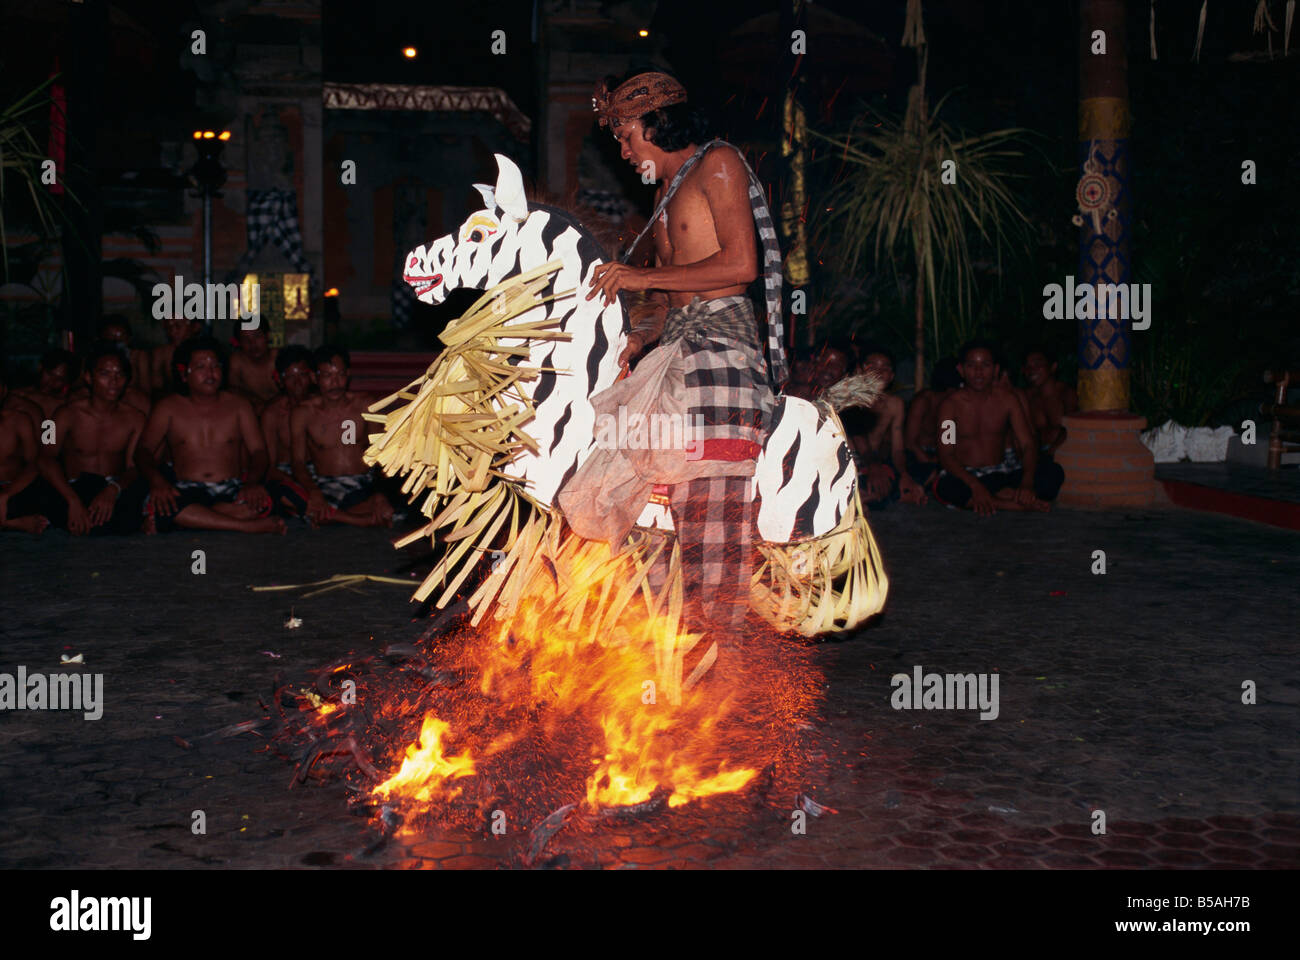 Fire dancing Bali Indonesia Asia RH Productions Stock Photo